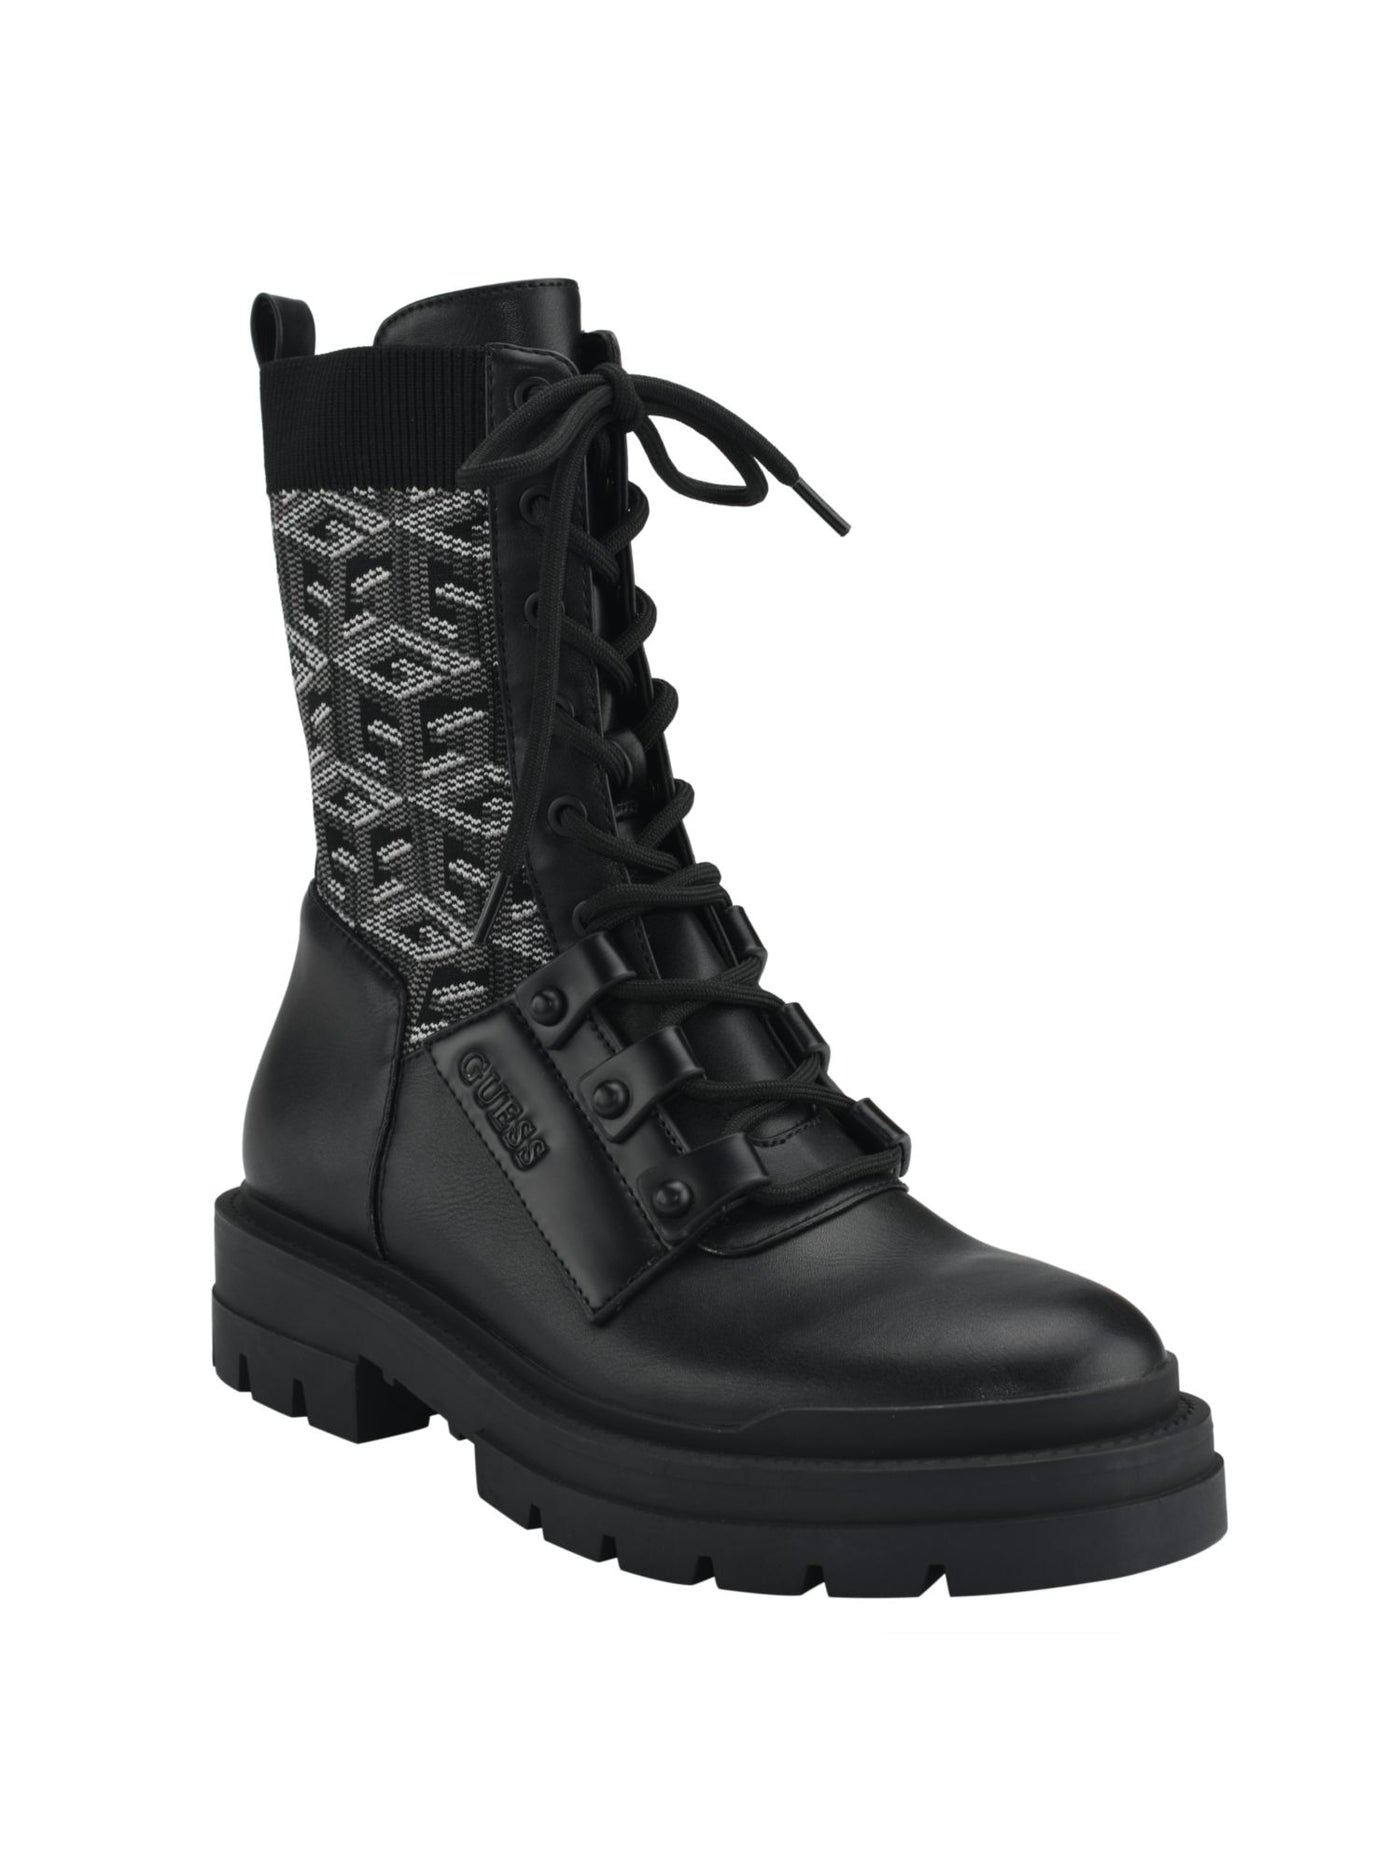 GUESS Womens Black Mixed Media 1" Platform Back Pull-Tab Padded Stretch Odalis Round Toe Block Heel Lace-Up Combat Boots 7 M